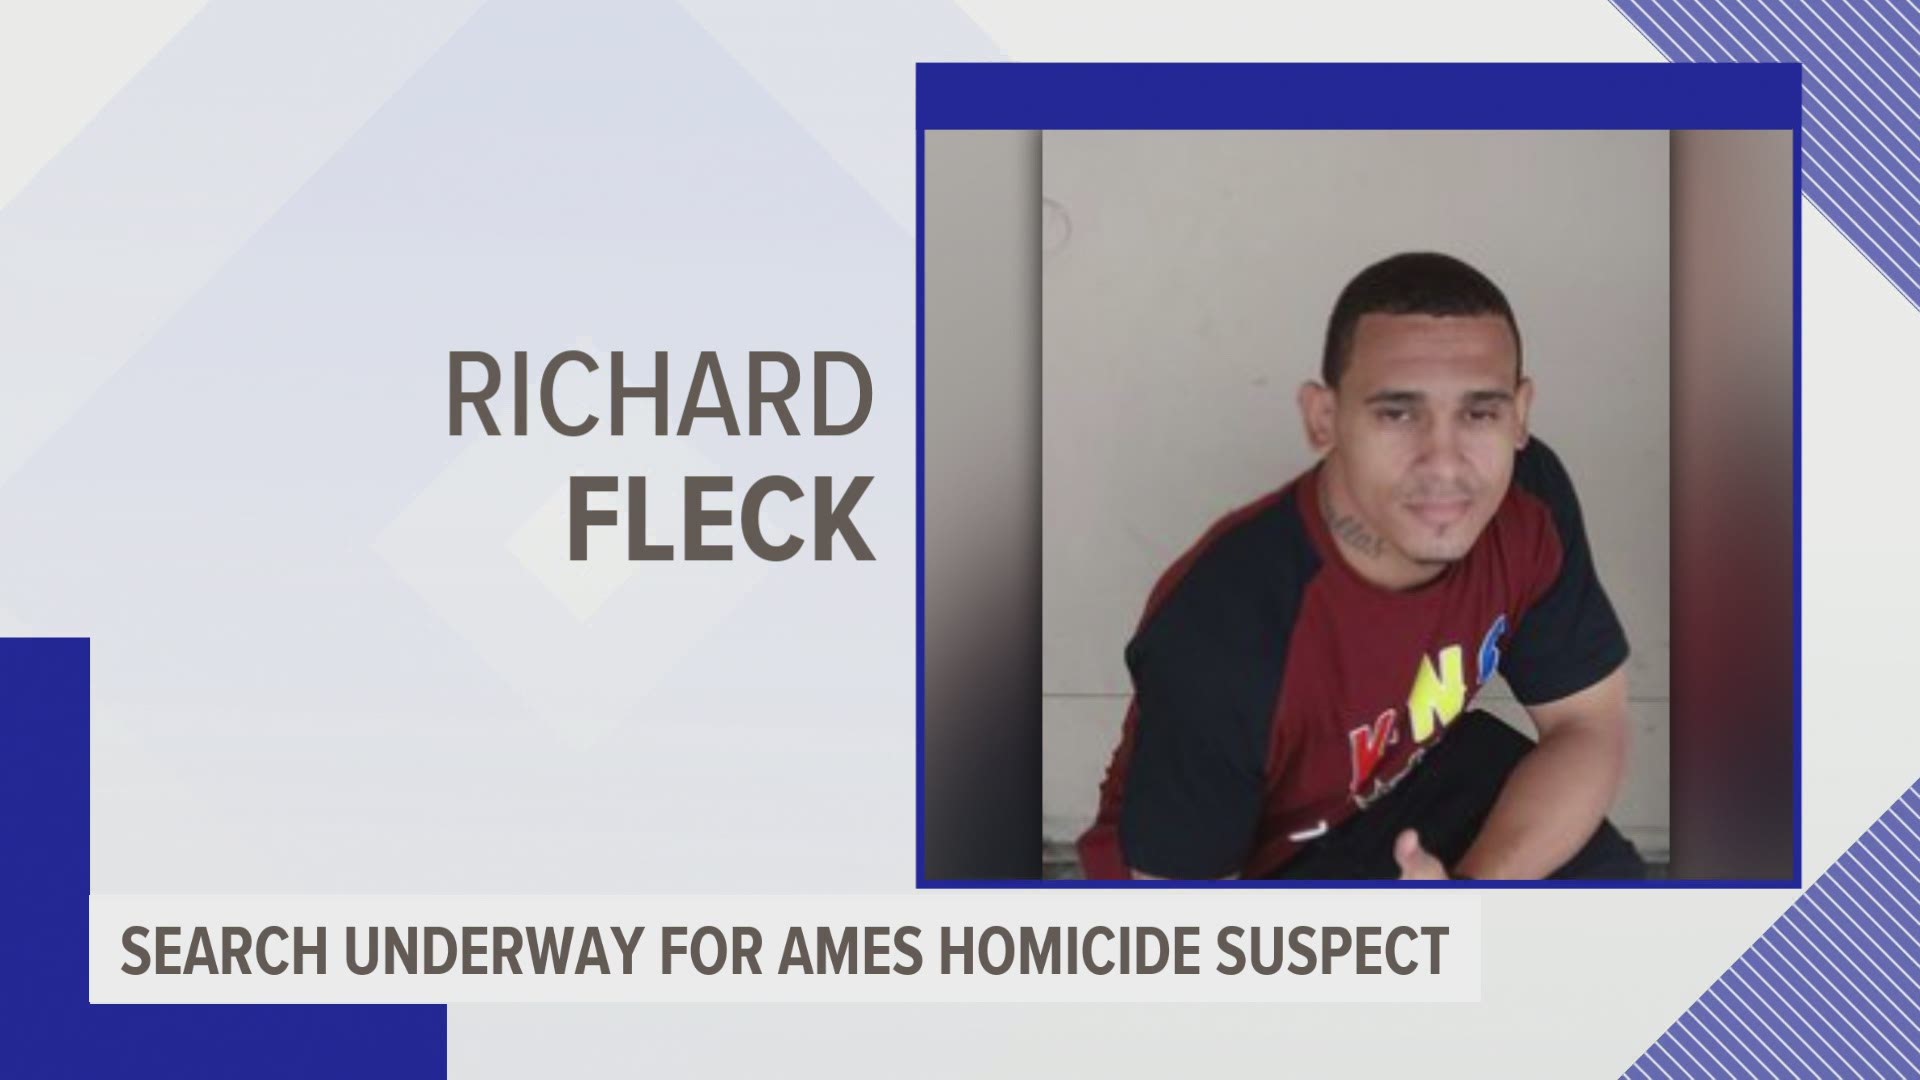 Police are searching for 33-year-old Richard Fleck, who also goes by "Rashaud Sims". A first-degree murder warrant has been issued for his arrest.